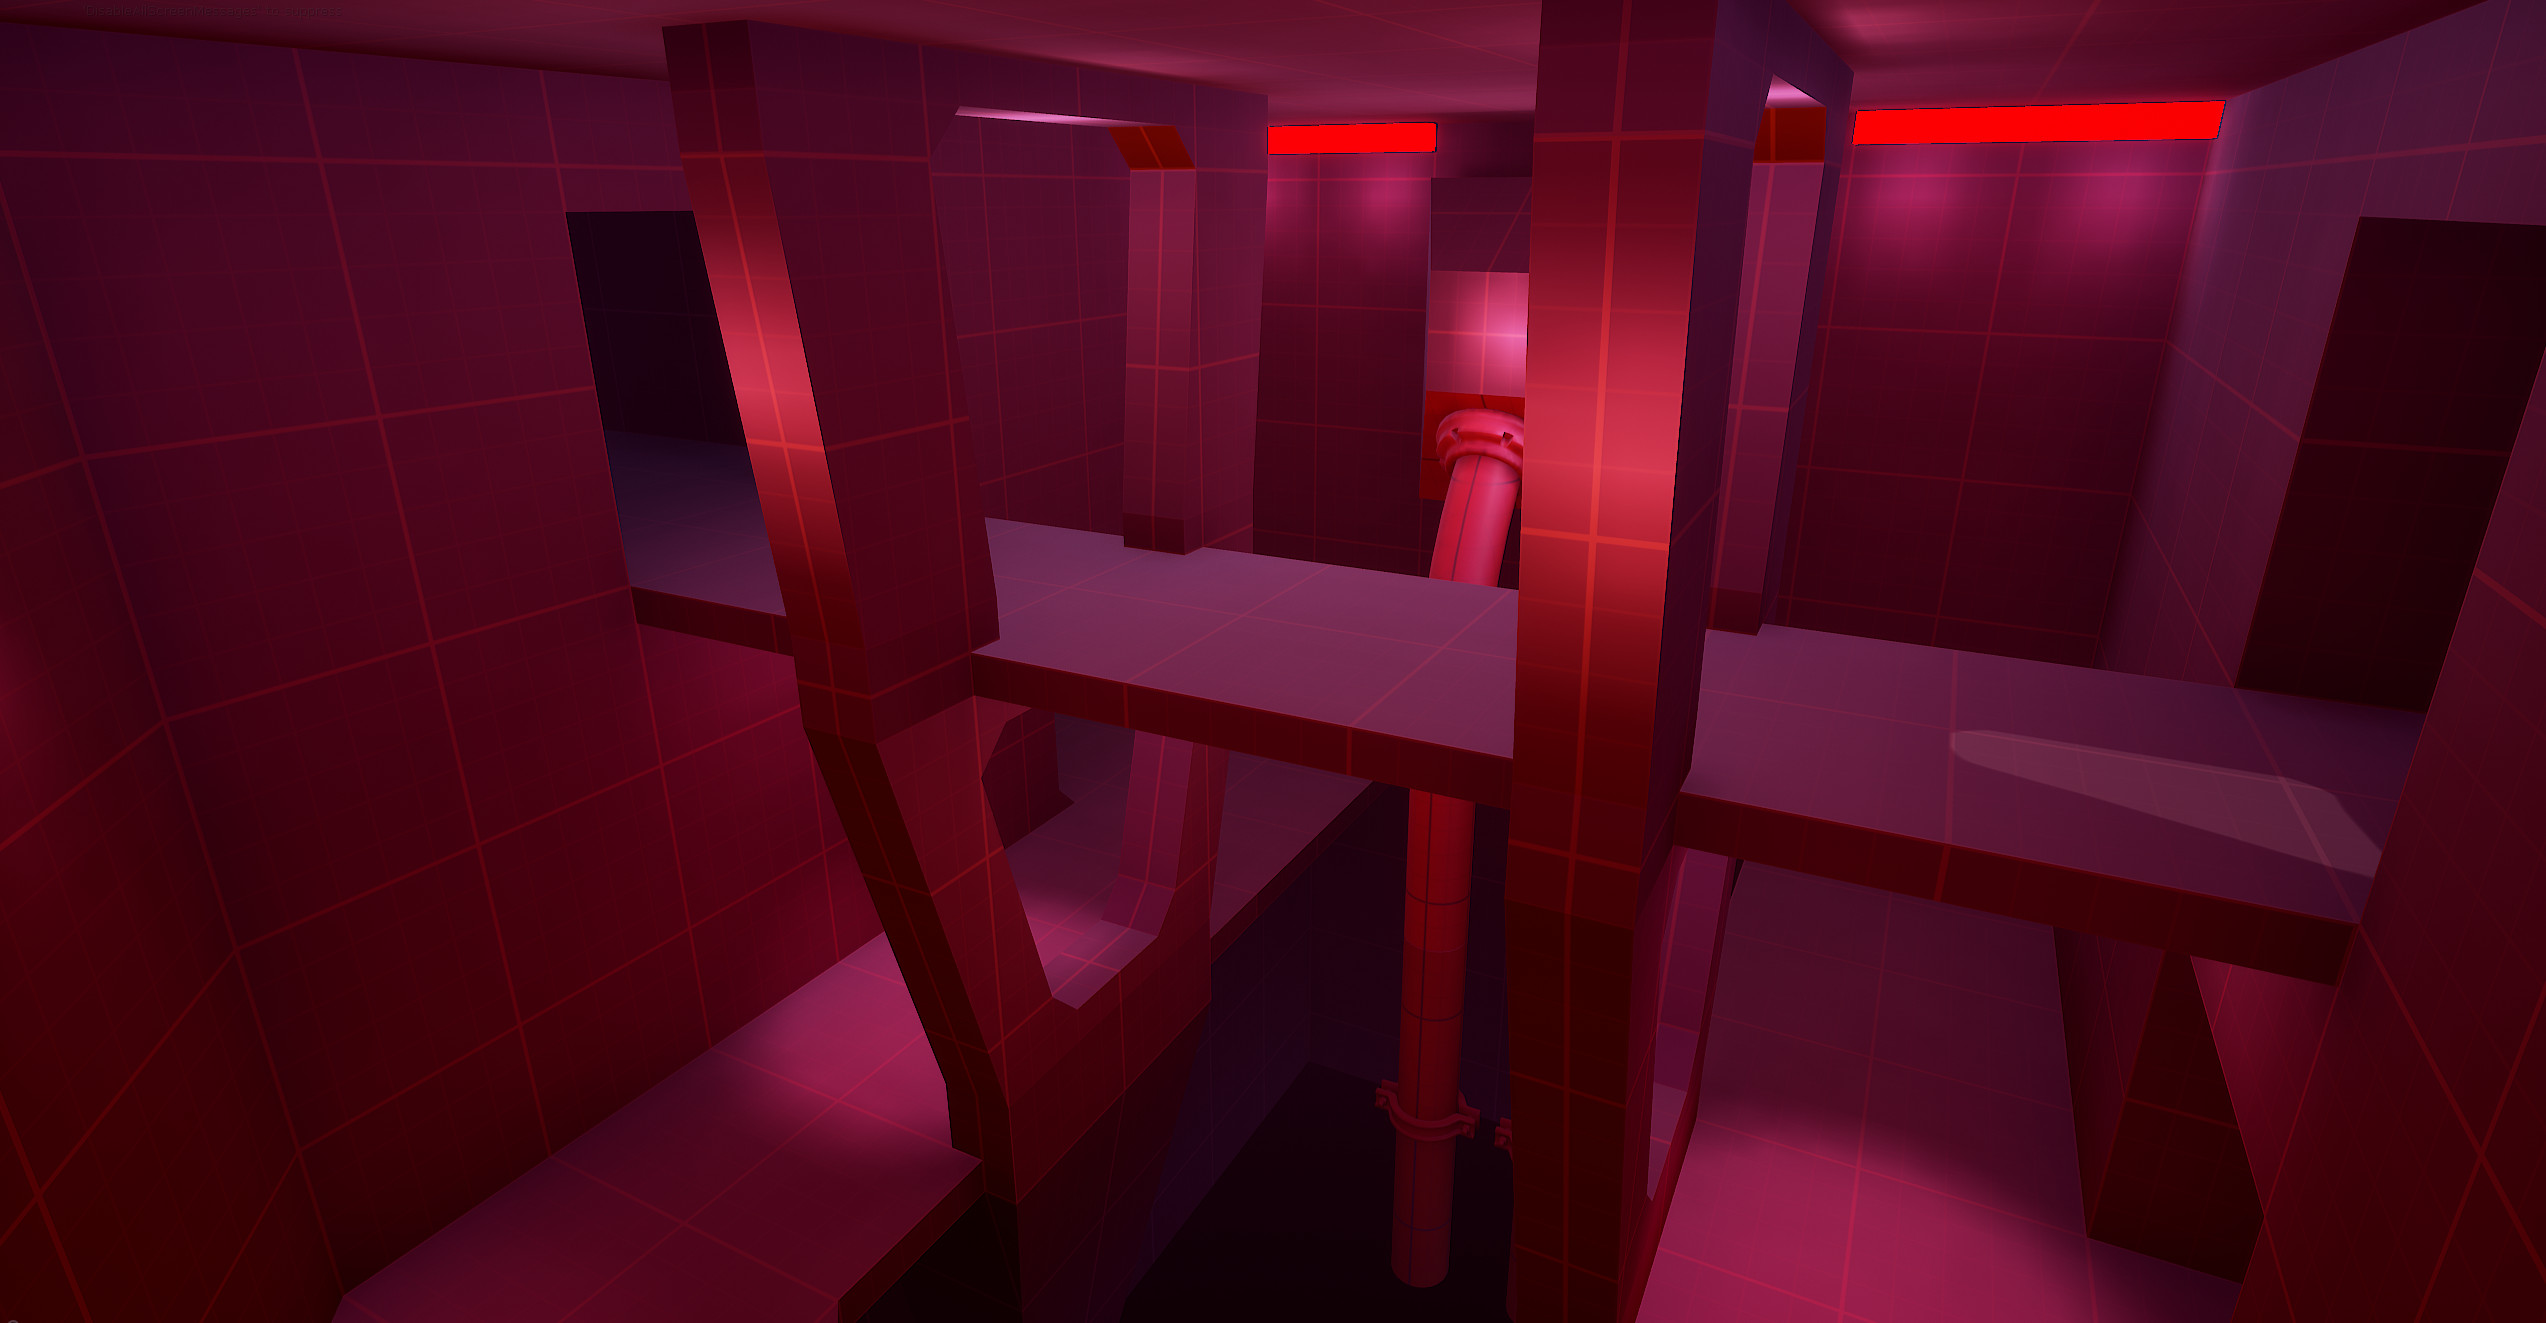 One of the crisscrossing path sections of the level. This one is in the red base.